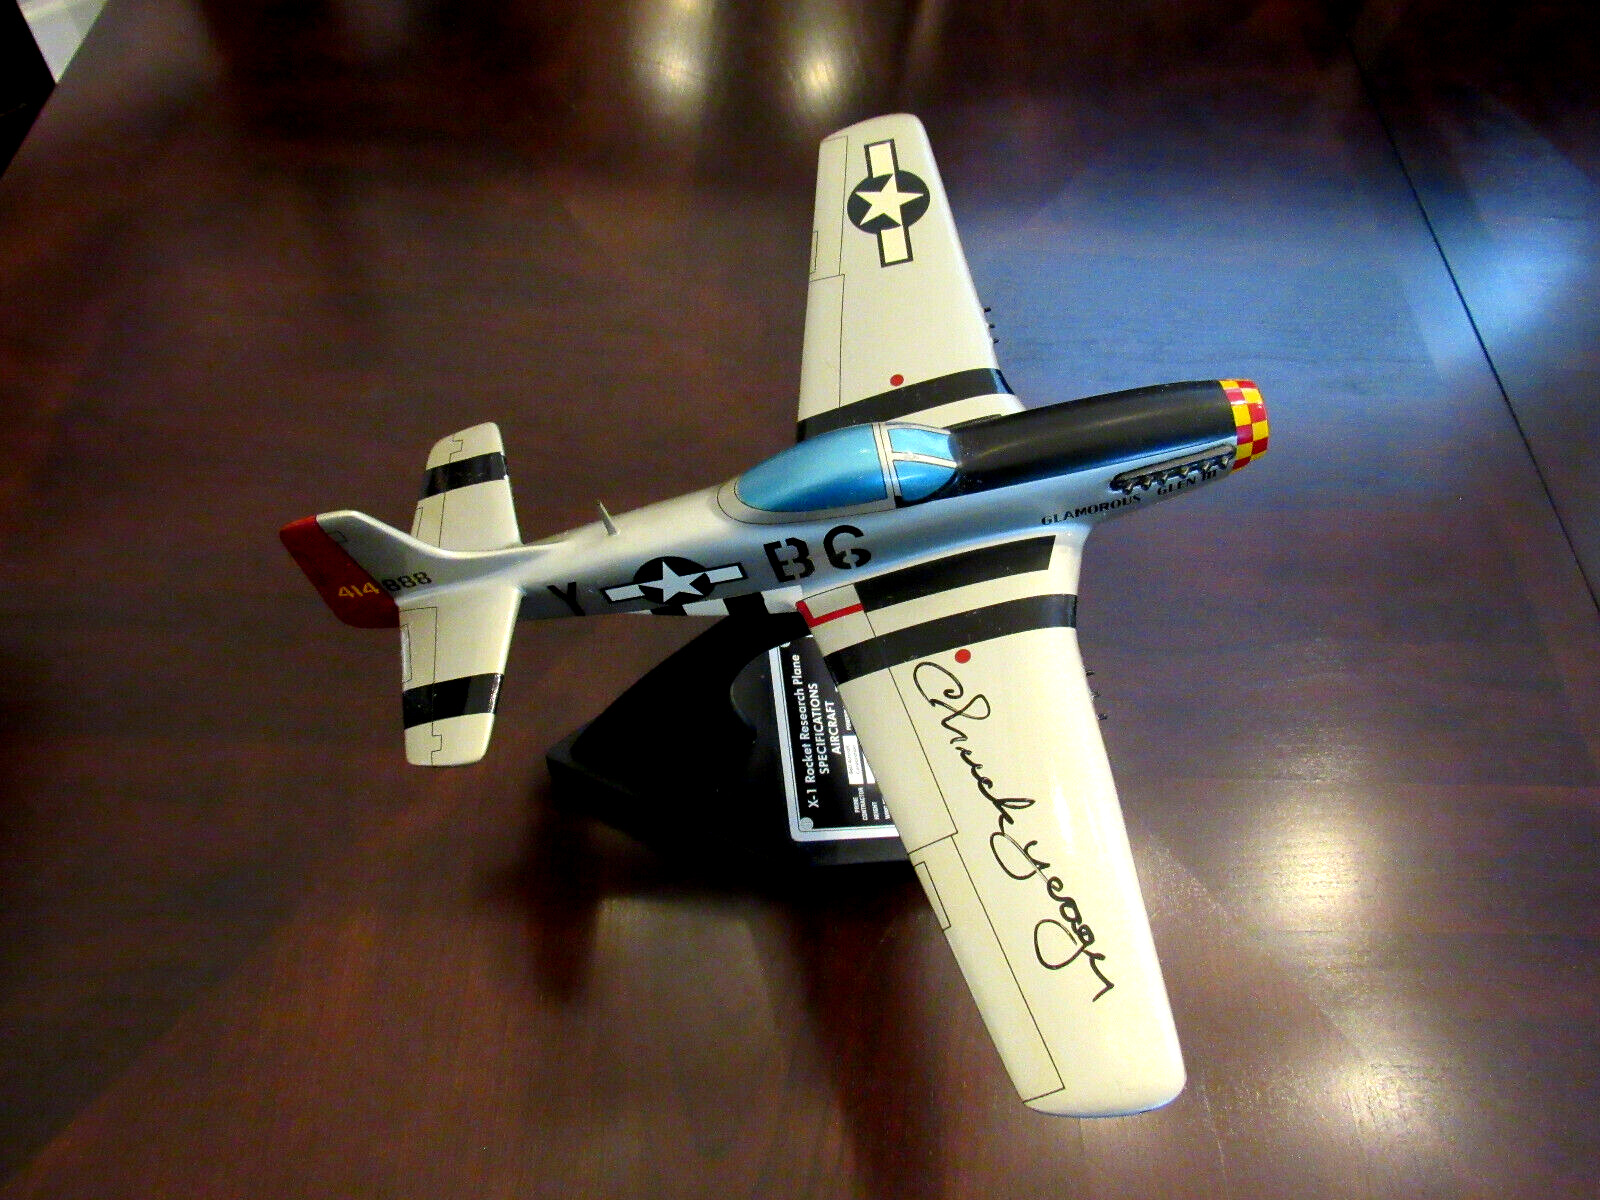 CHUCK YEAGER SPEED OF SOUND ACE PILOT SIGNED AUTO P-51 AIRPLANE BEAUTY